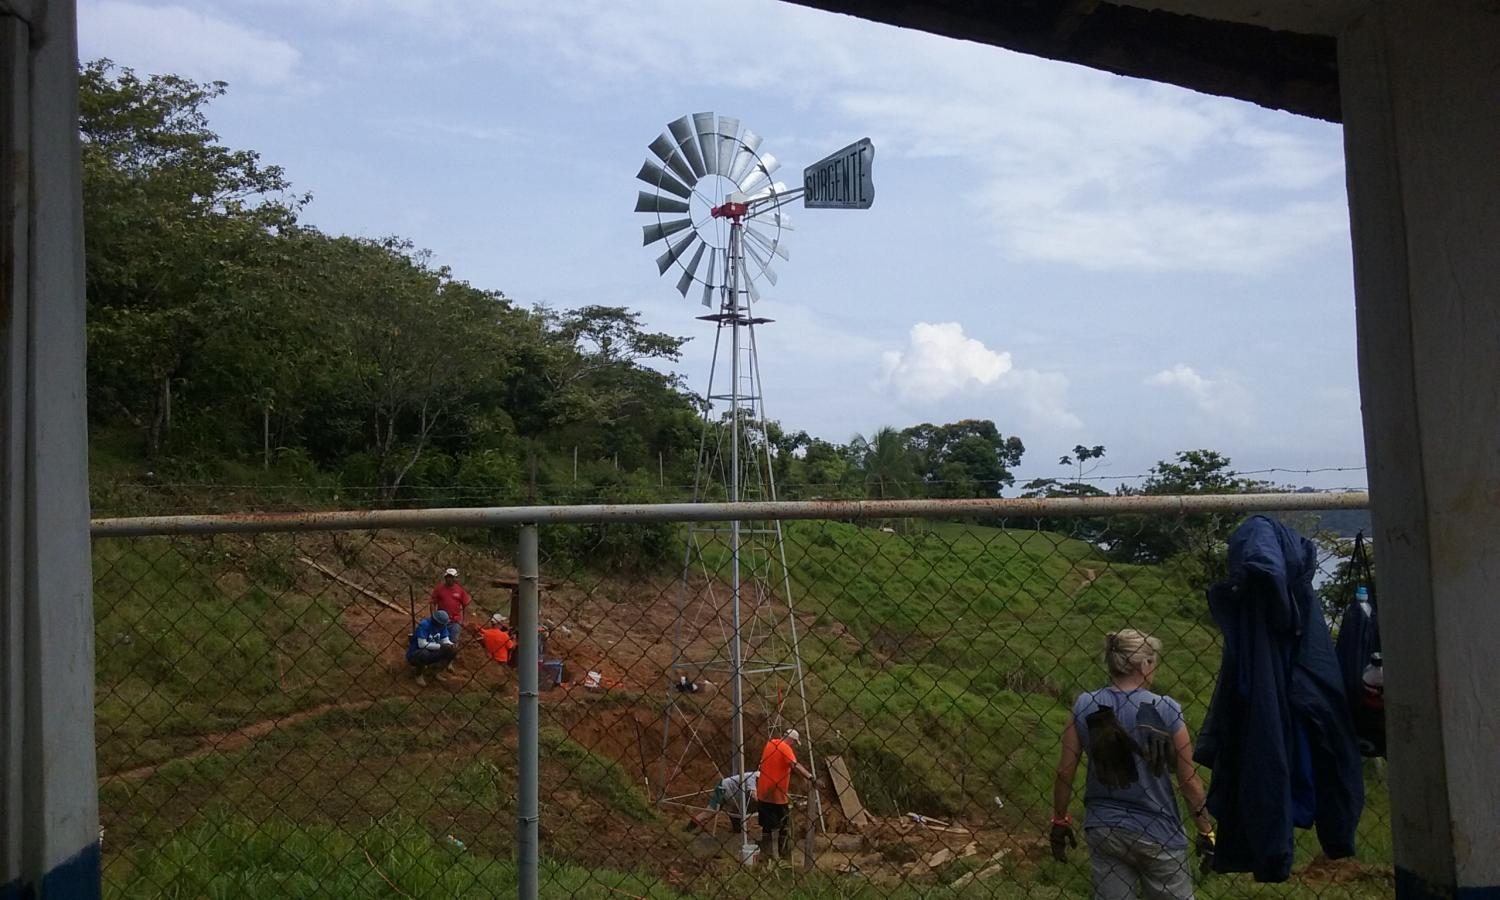 The finished windmill provided fresh water for the people living in Panama.